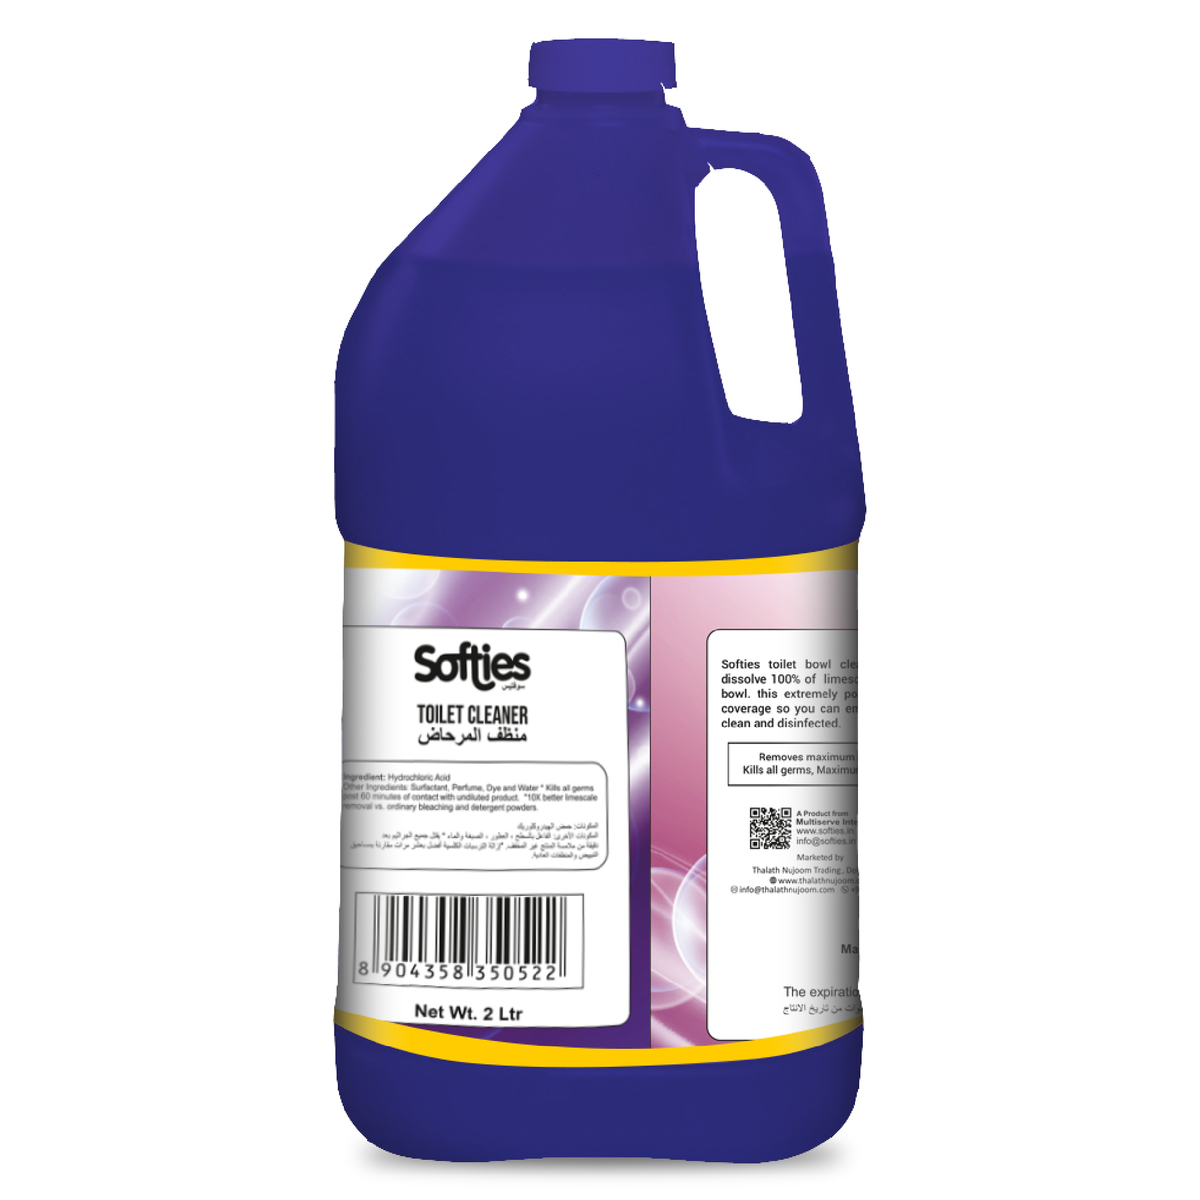 Softies Toilet Cleaner 2 Litres